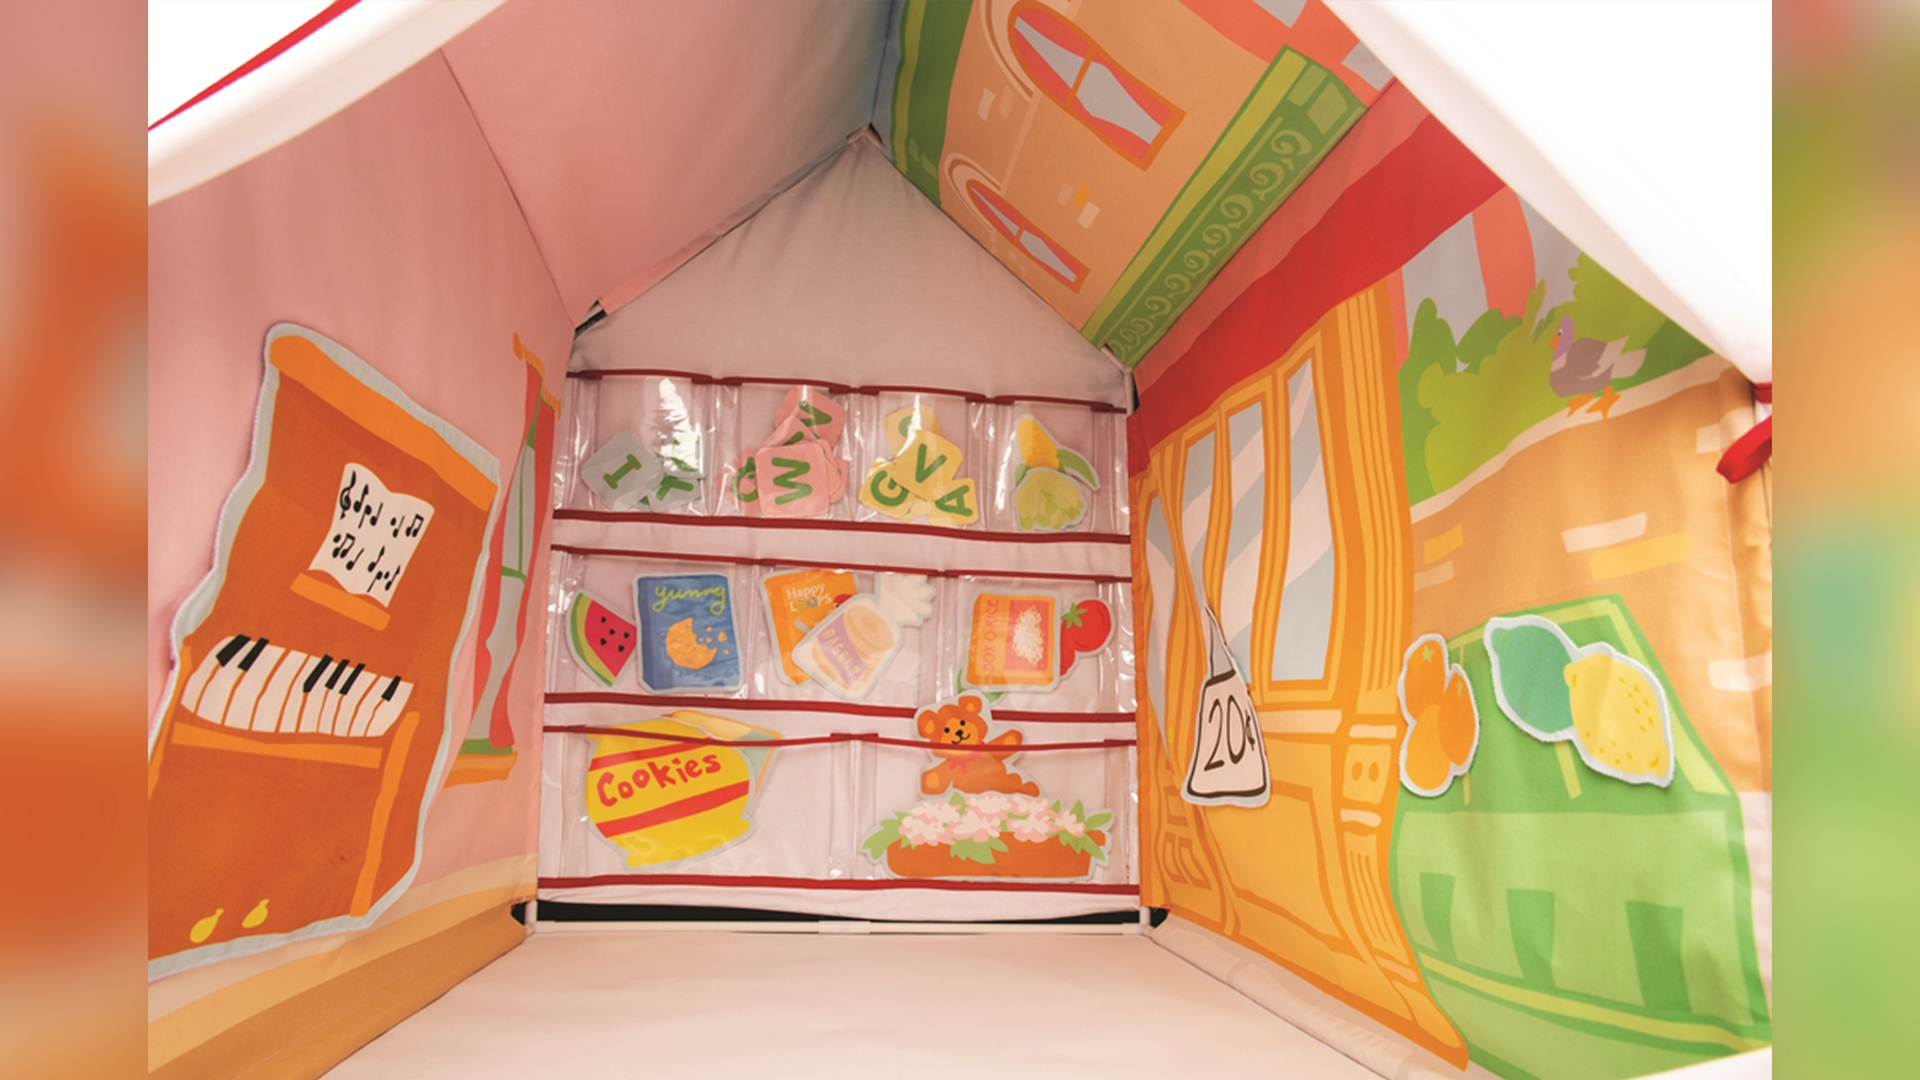 Colorful interior of play set with attachable shapes organized in pockets